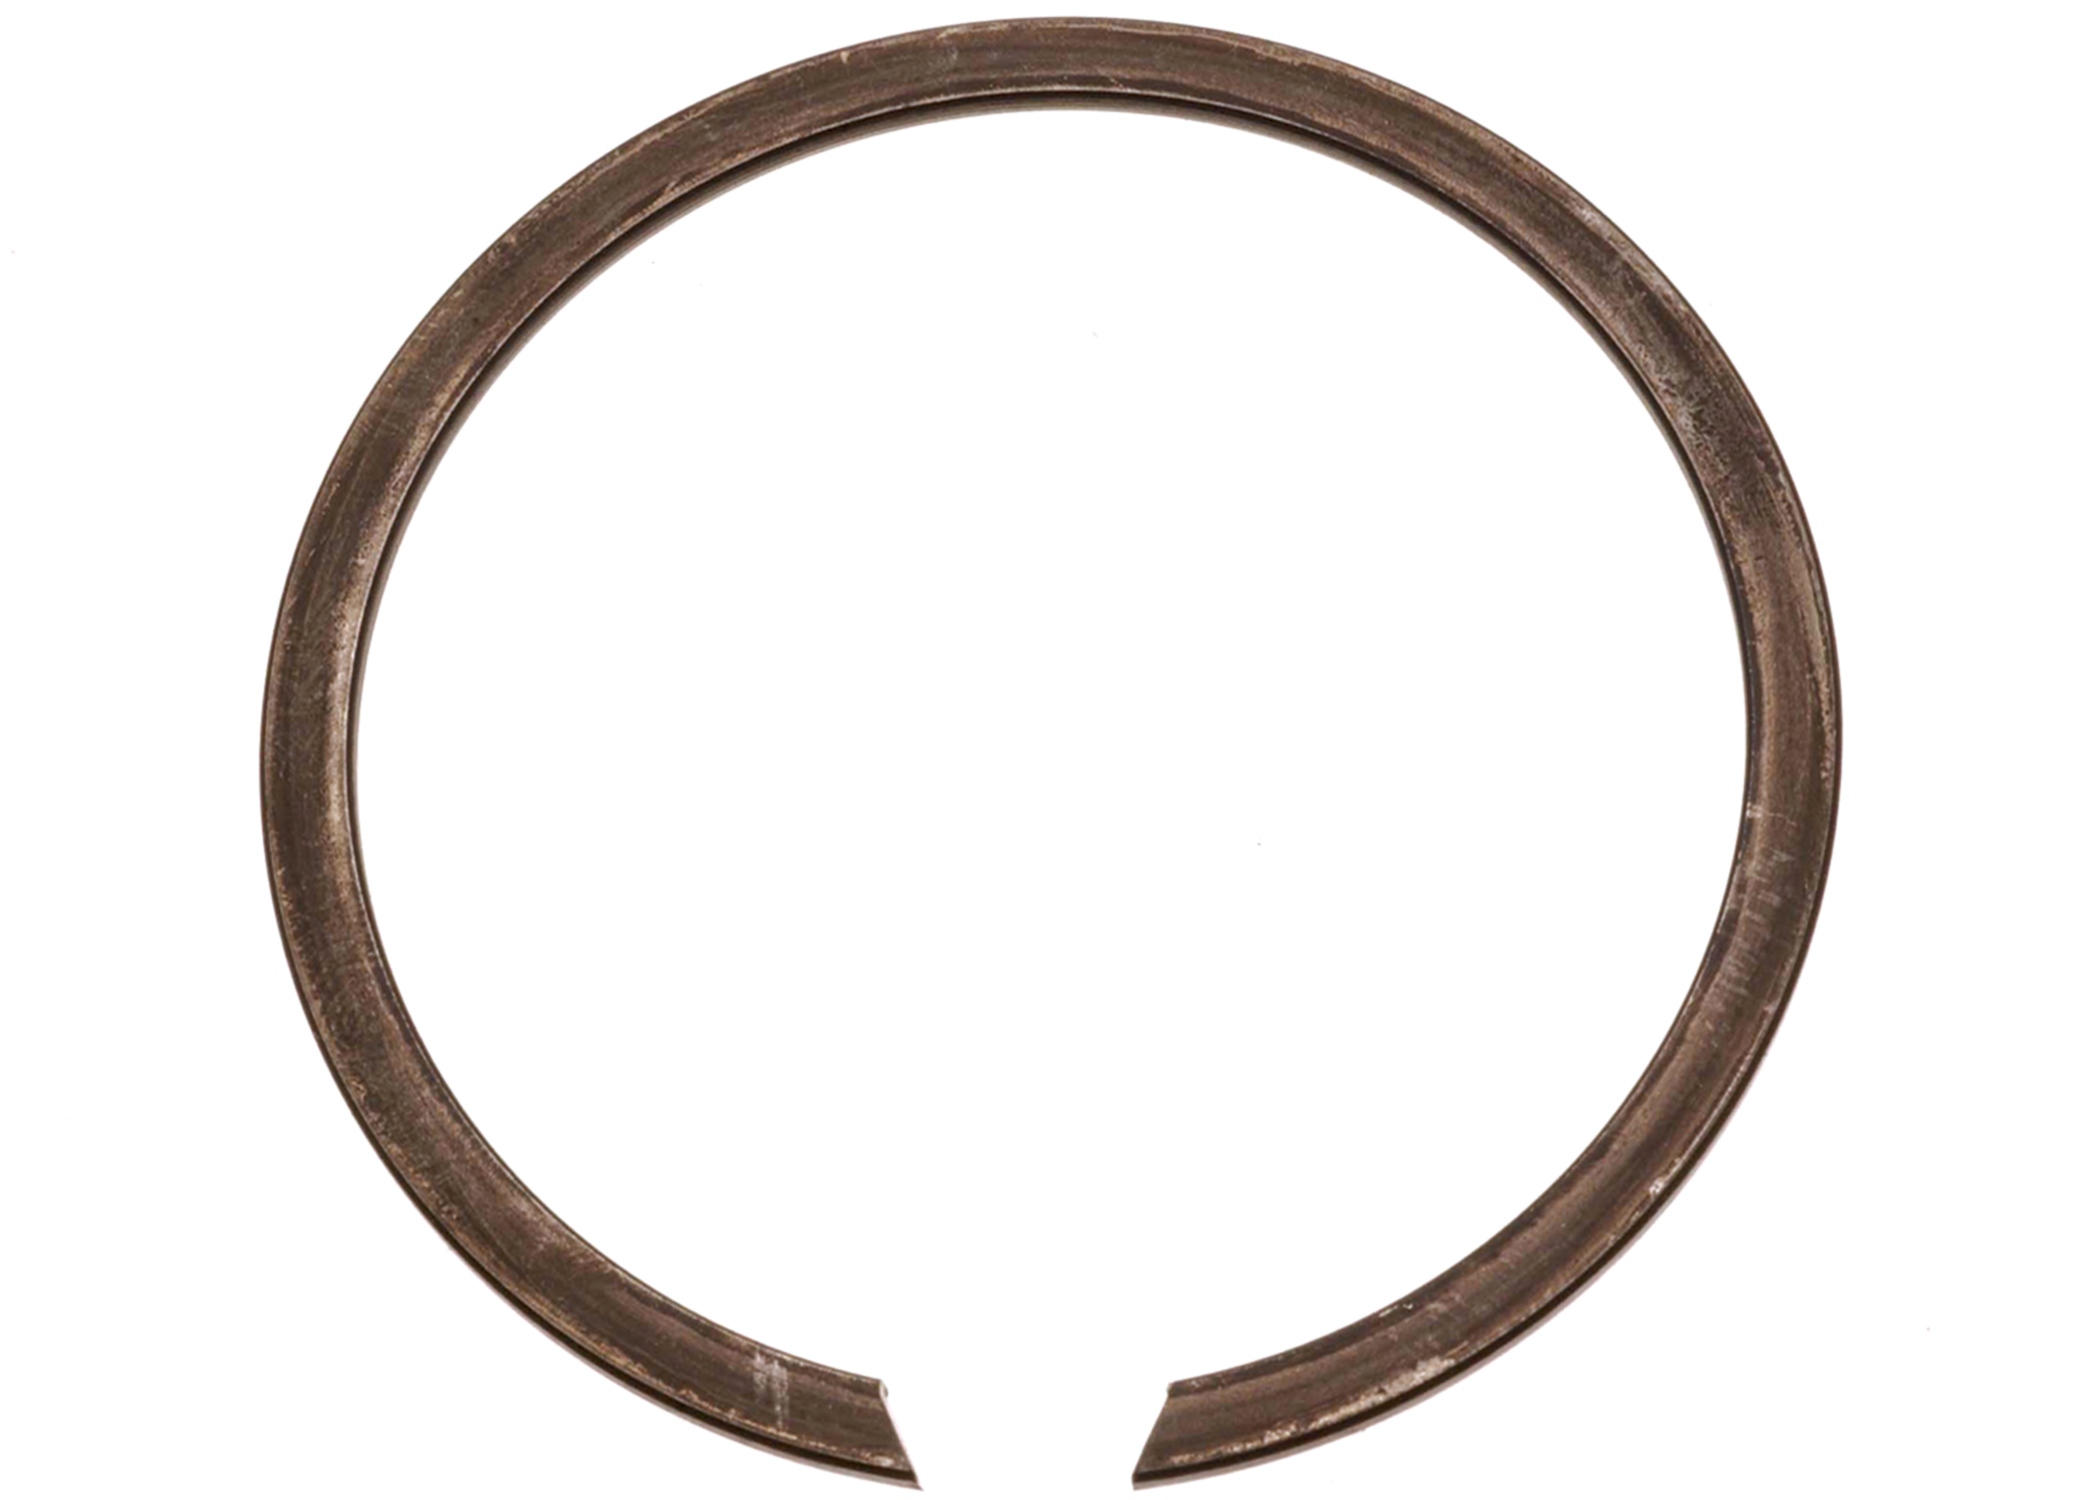 GM GENUINE PARTS - Automatic Transmission Clutch Spring Retaining Ring - GMP 8661568